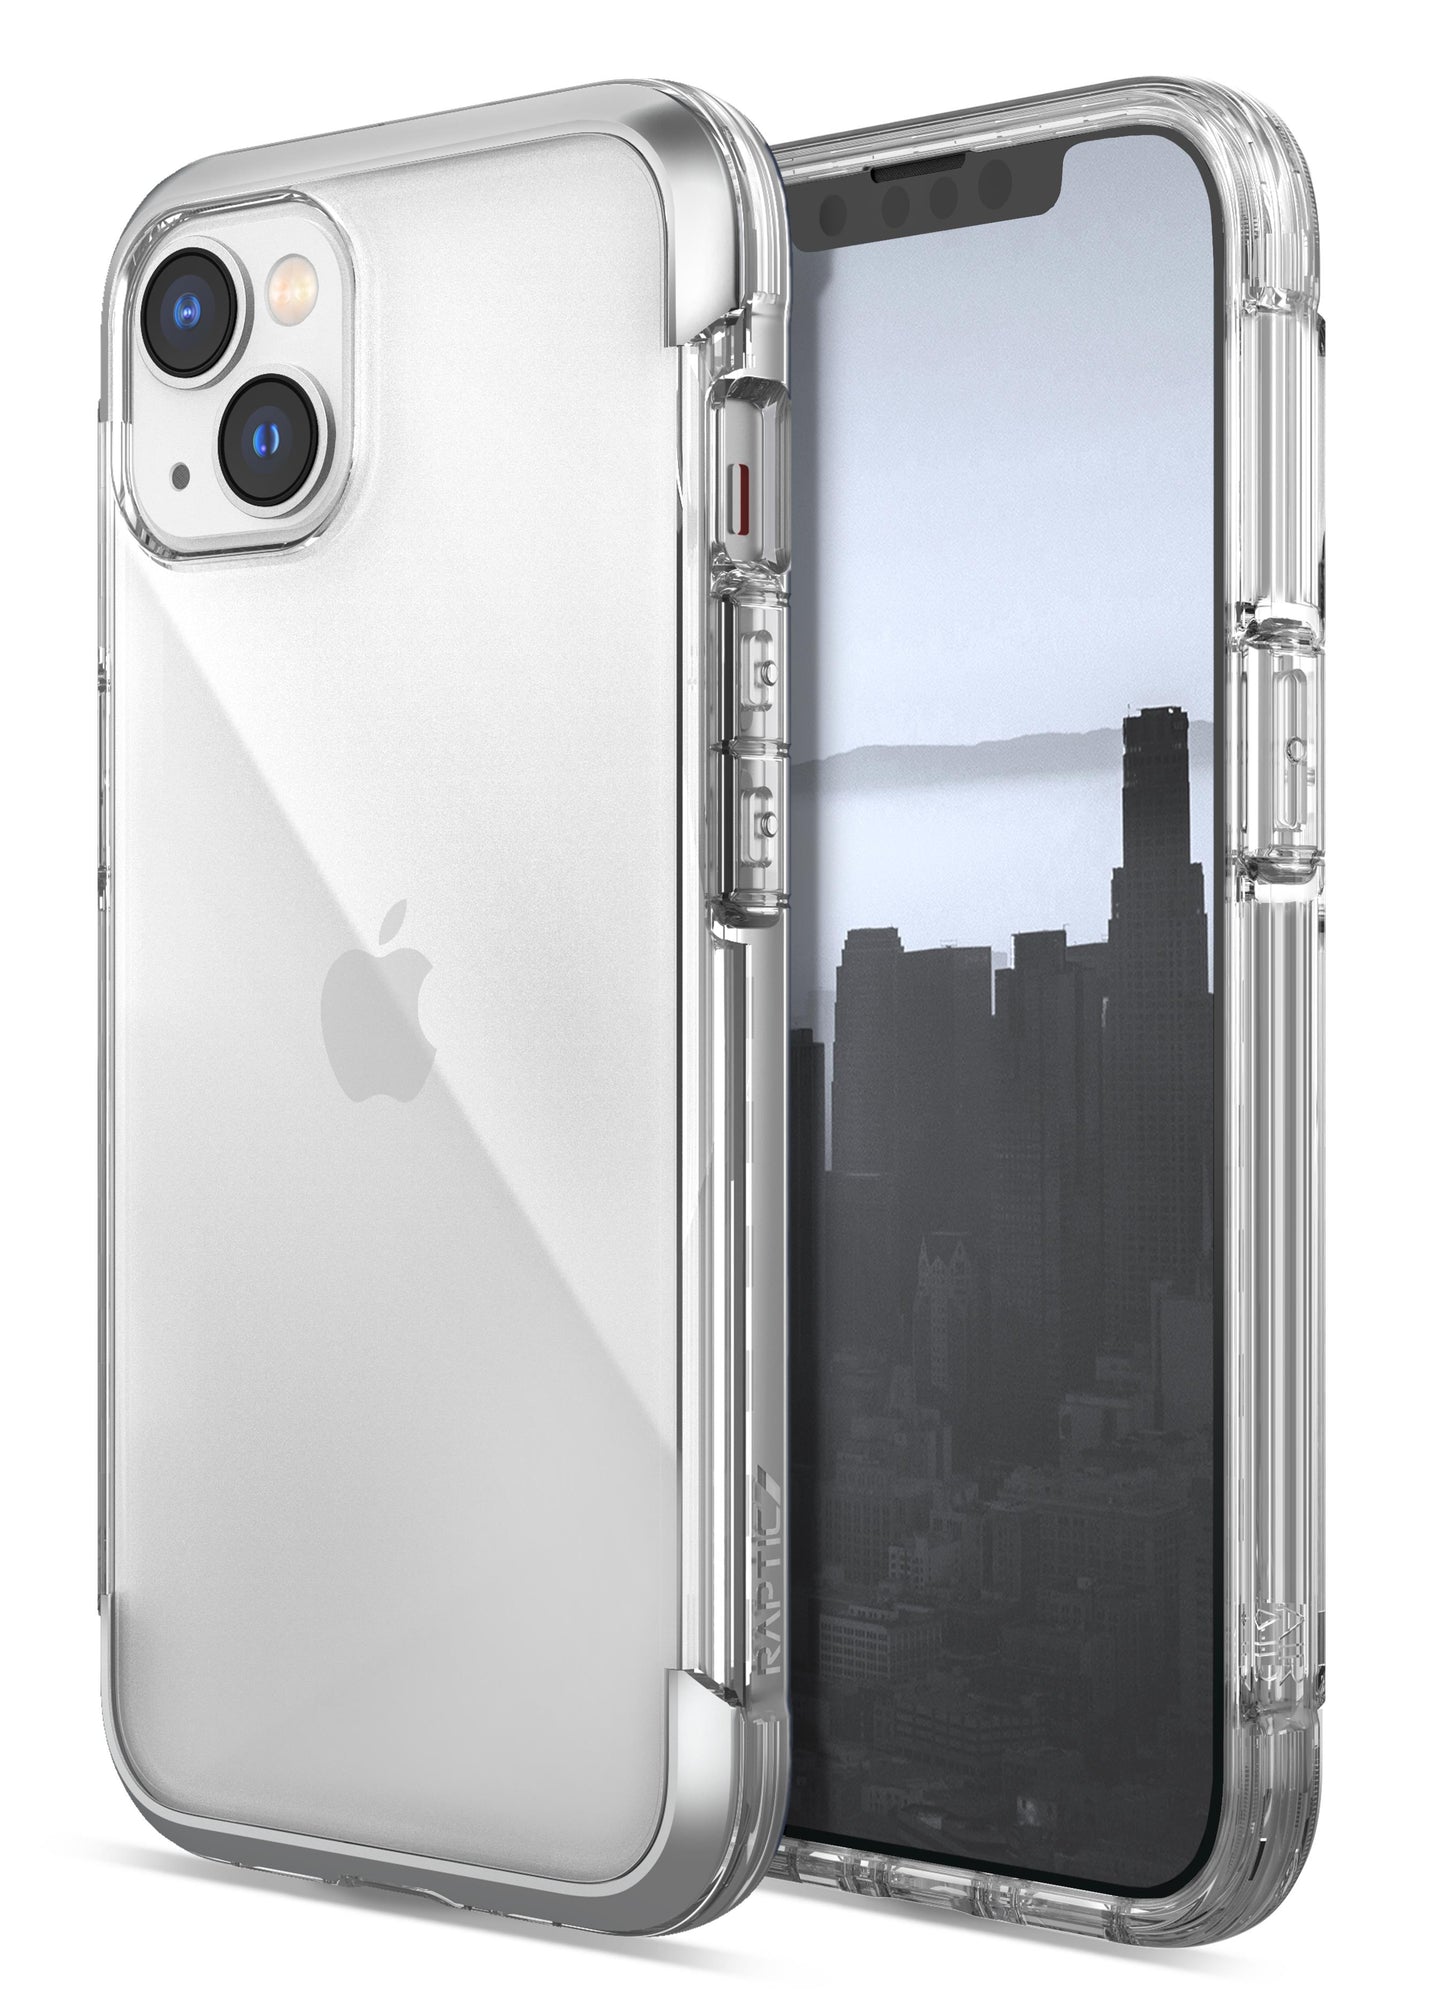 A clear case for the iPhone 11 Pro: Aeon - iPhone 14 Pro Max Air Case - Raptic Air.